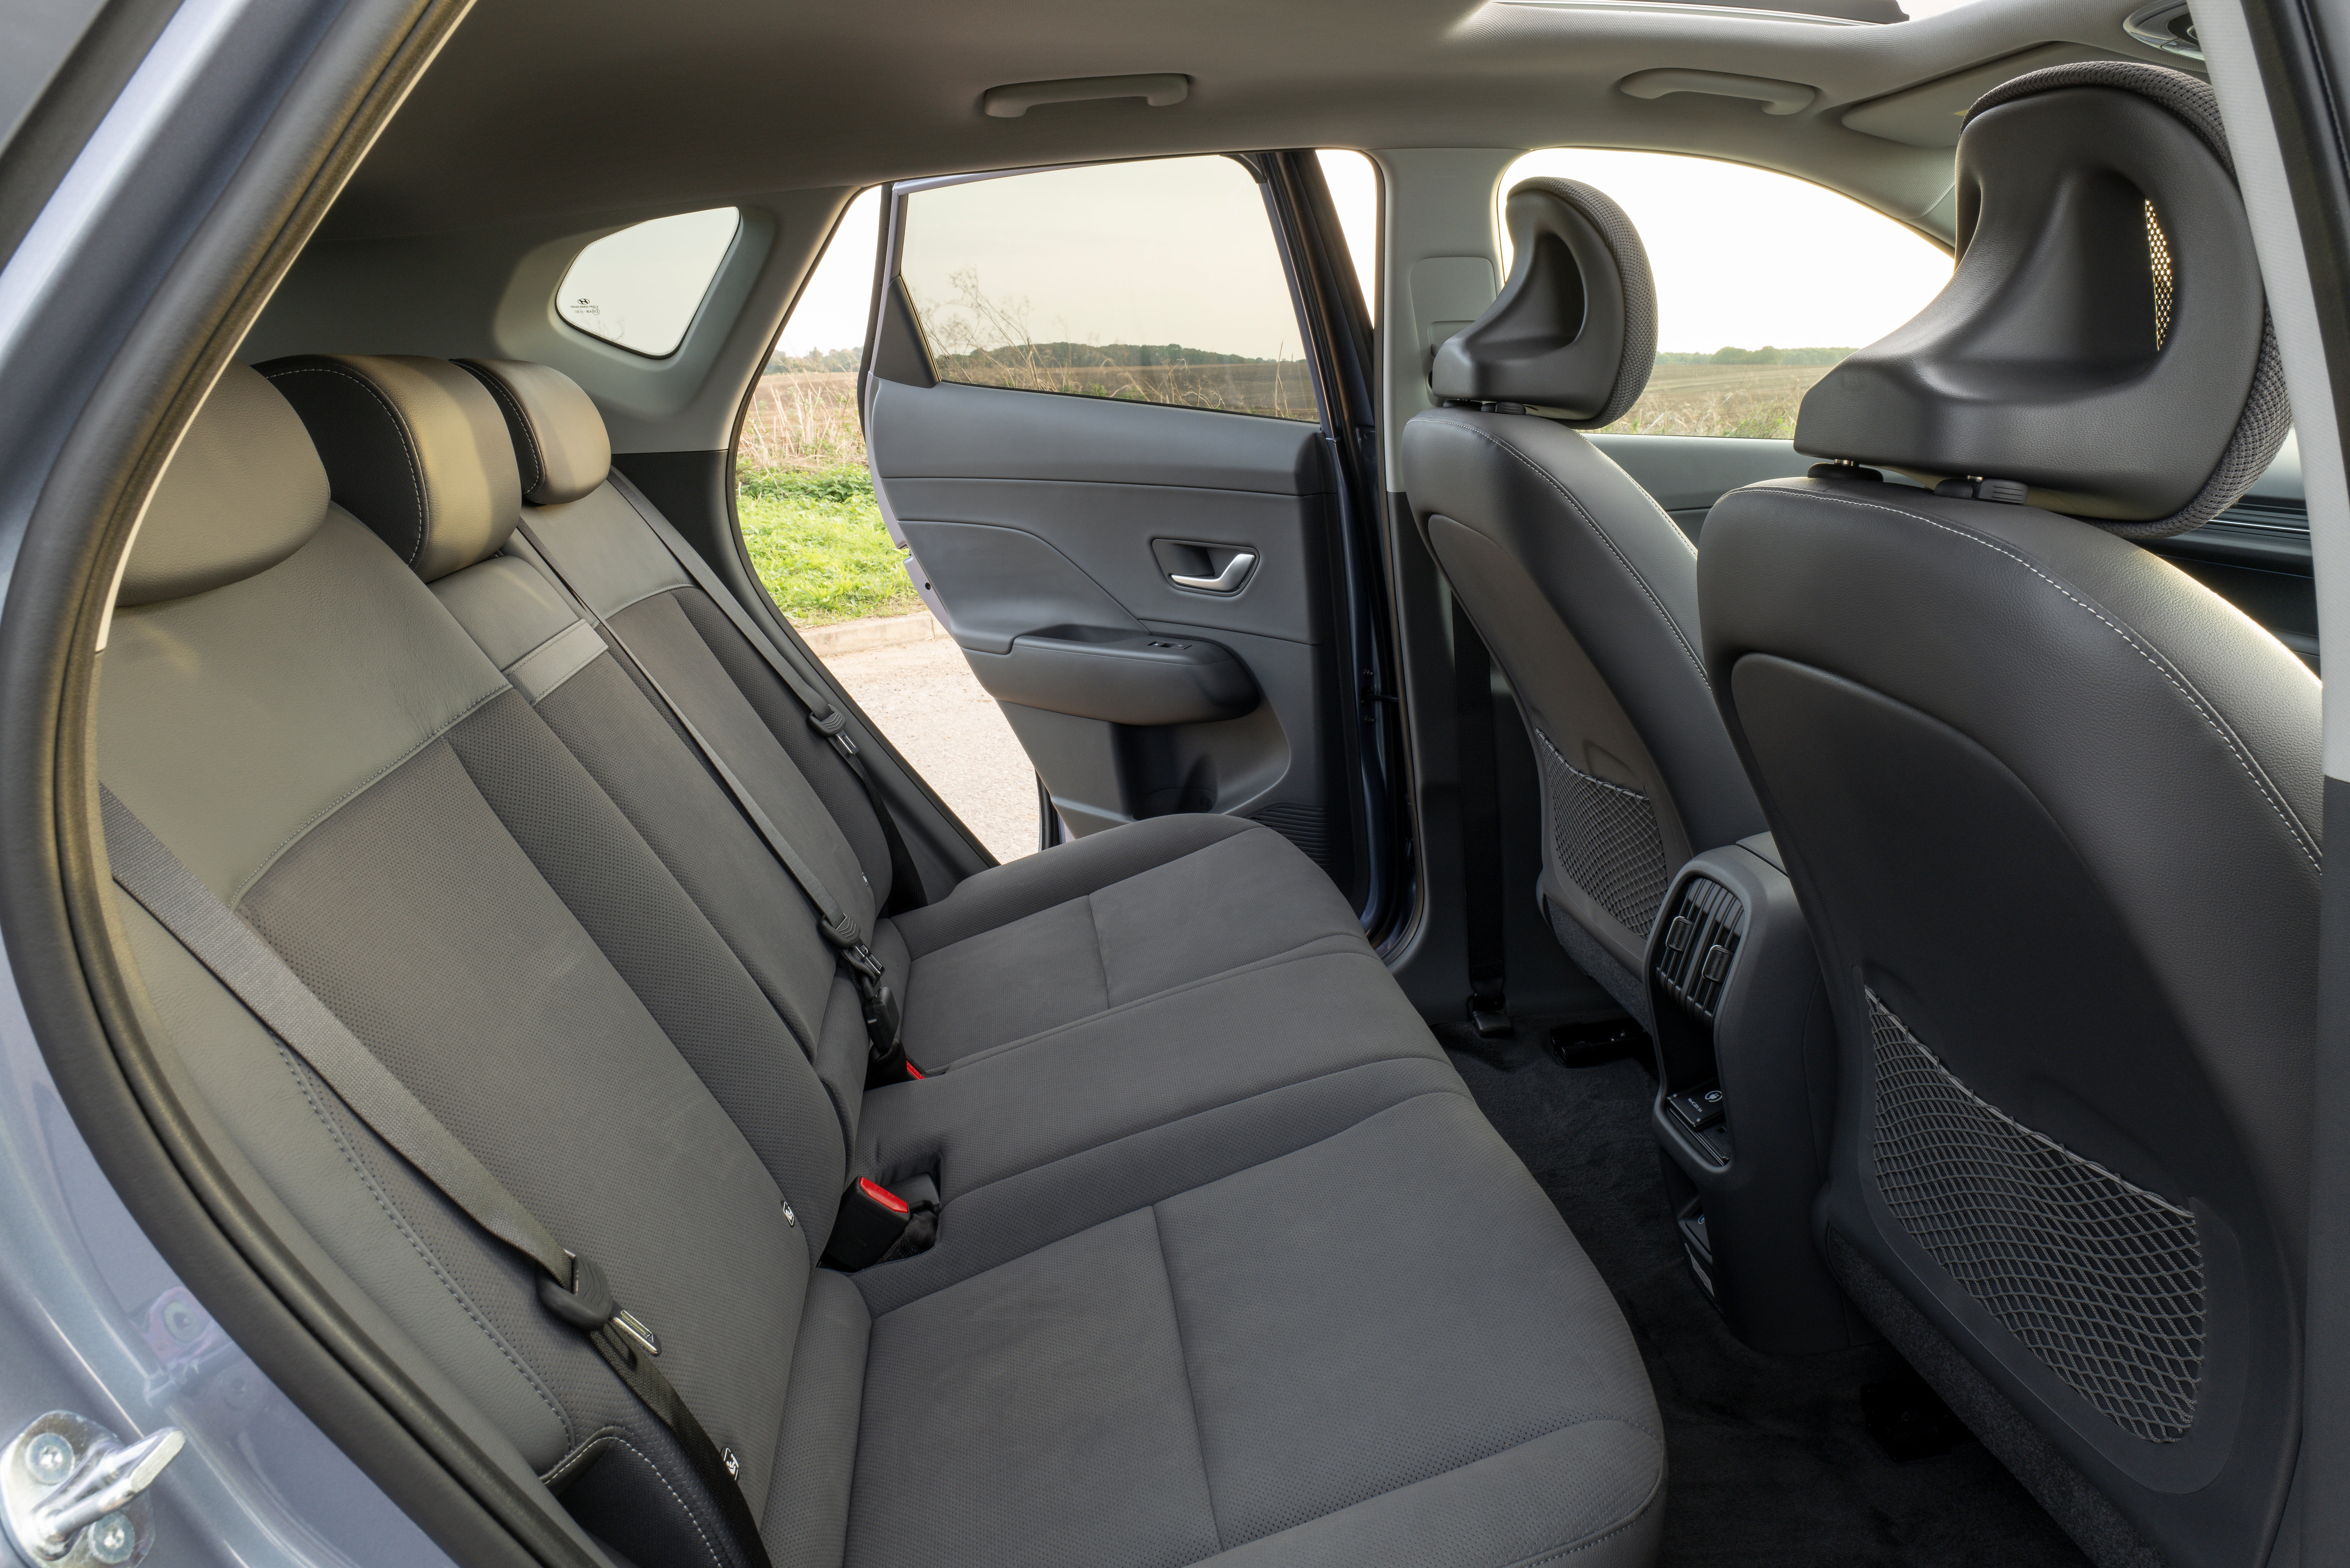 The new design of the rear bench seat gives the feel of a roomier cabin